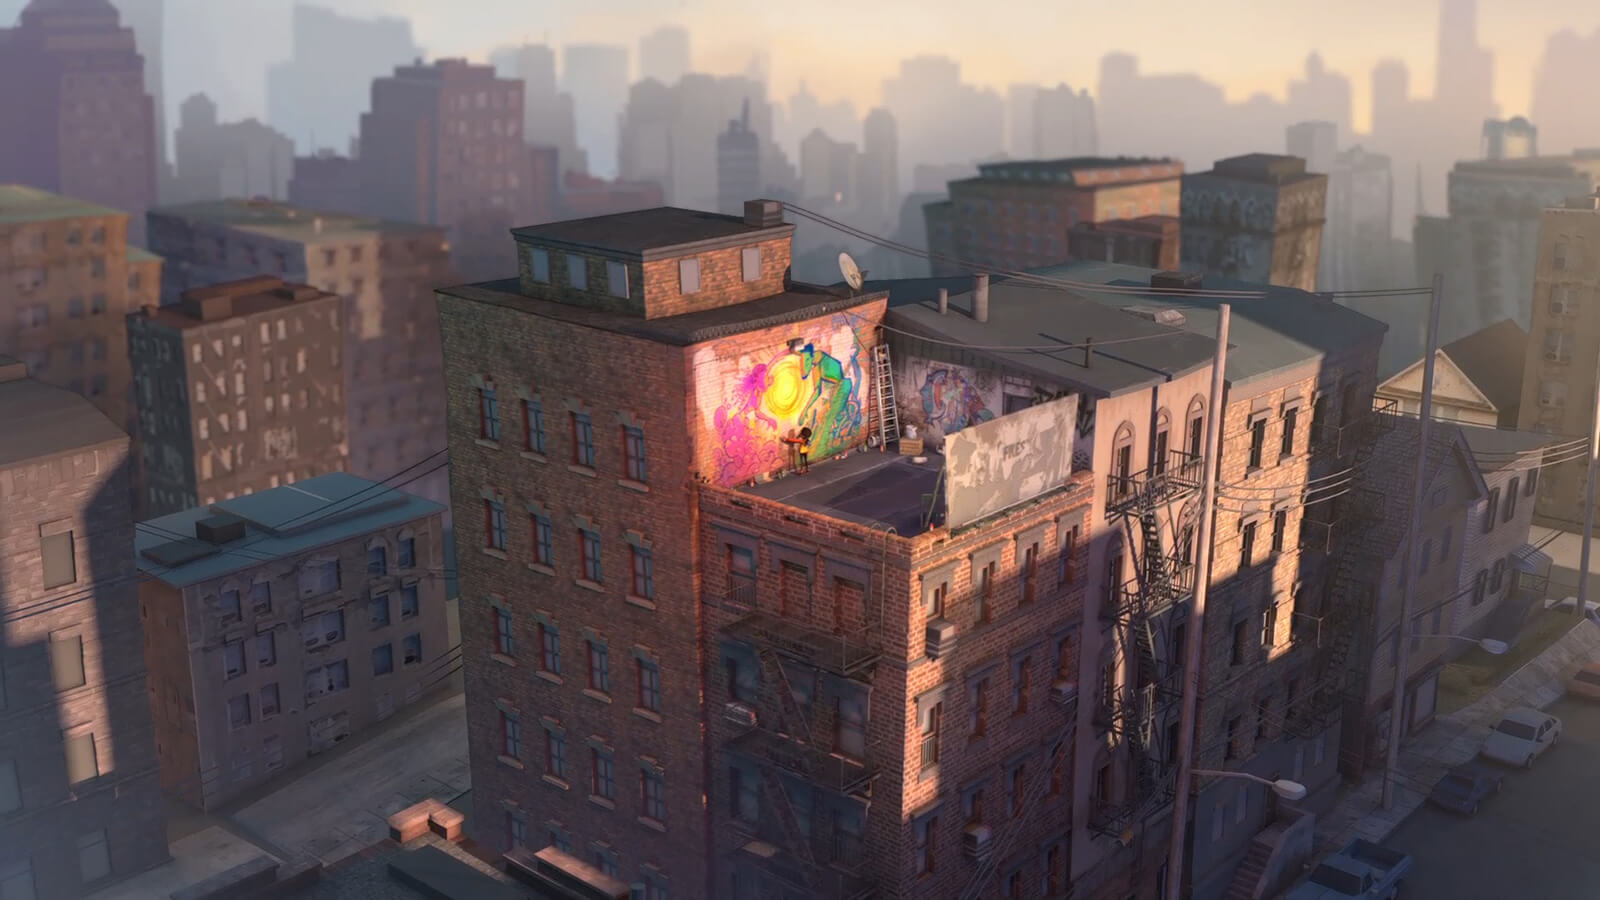 A brick apartment at dawn in an urban area. A girl is seen on the room standing in front of a colorful spray-painted artwork.